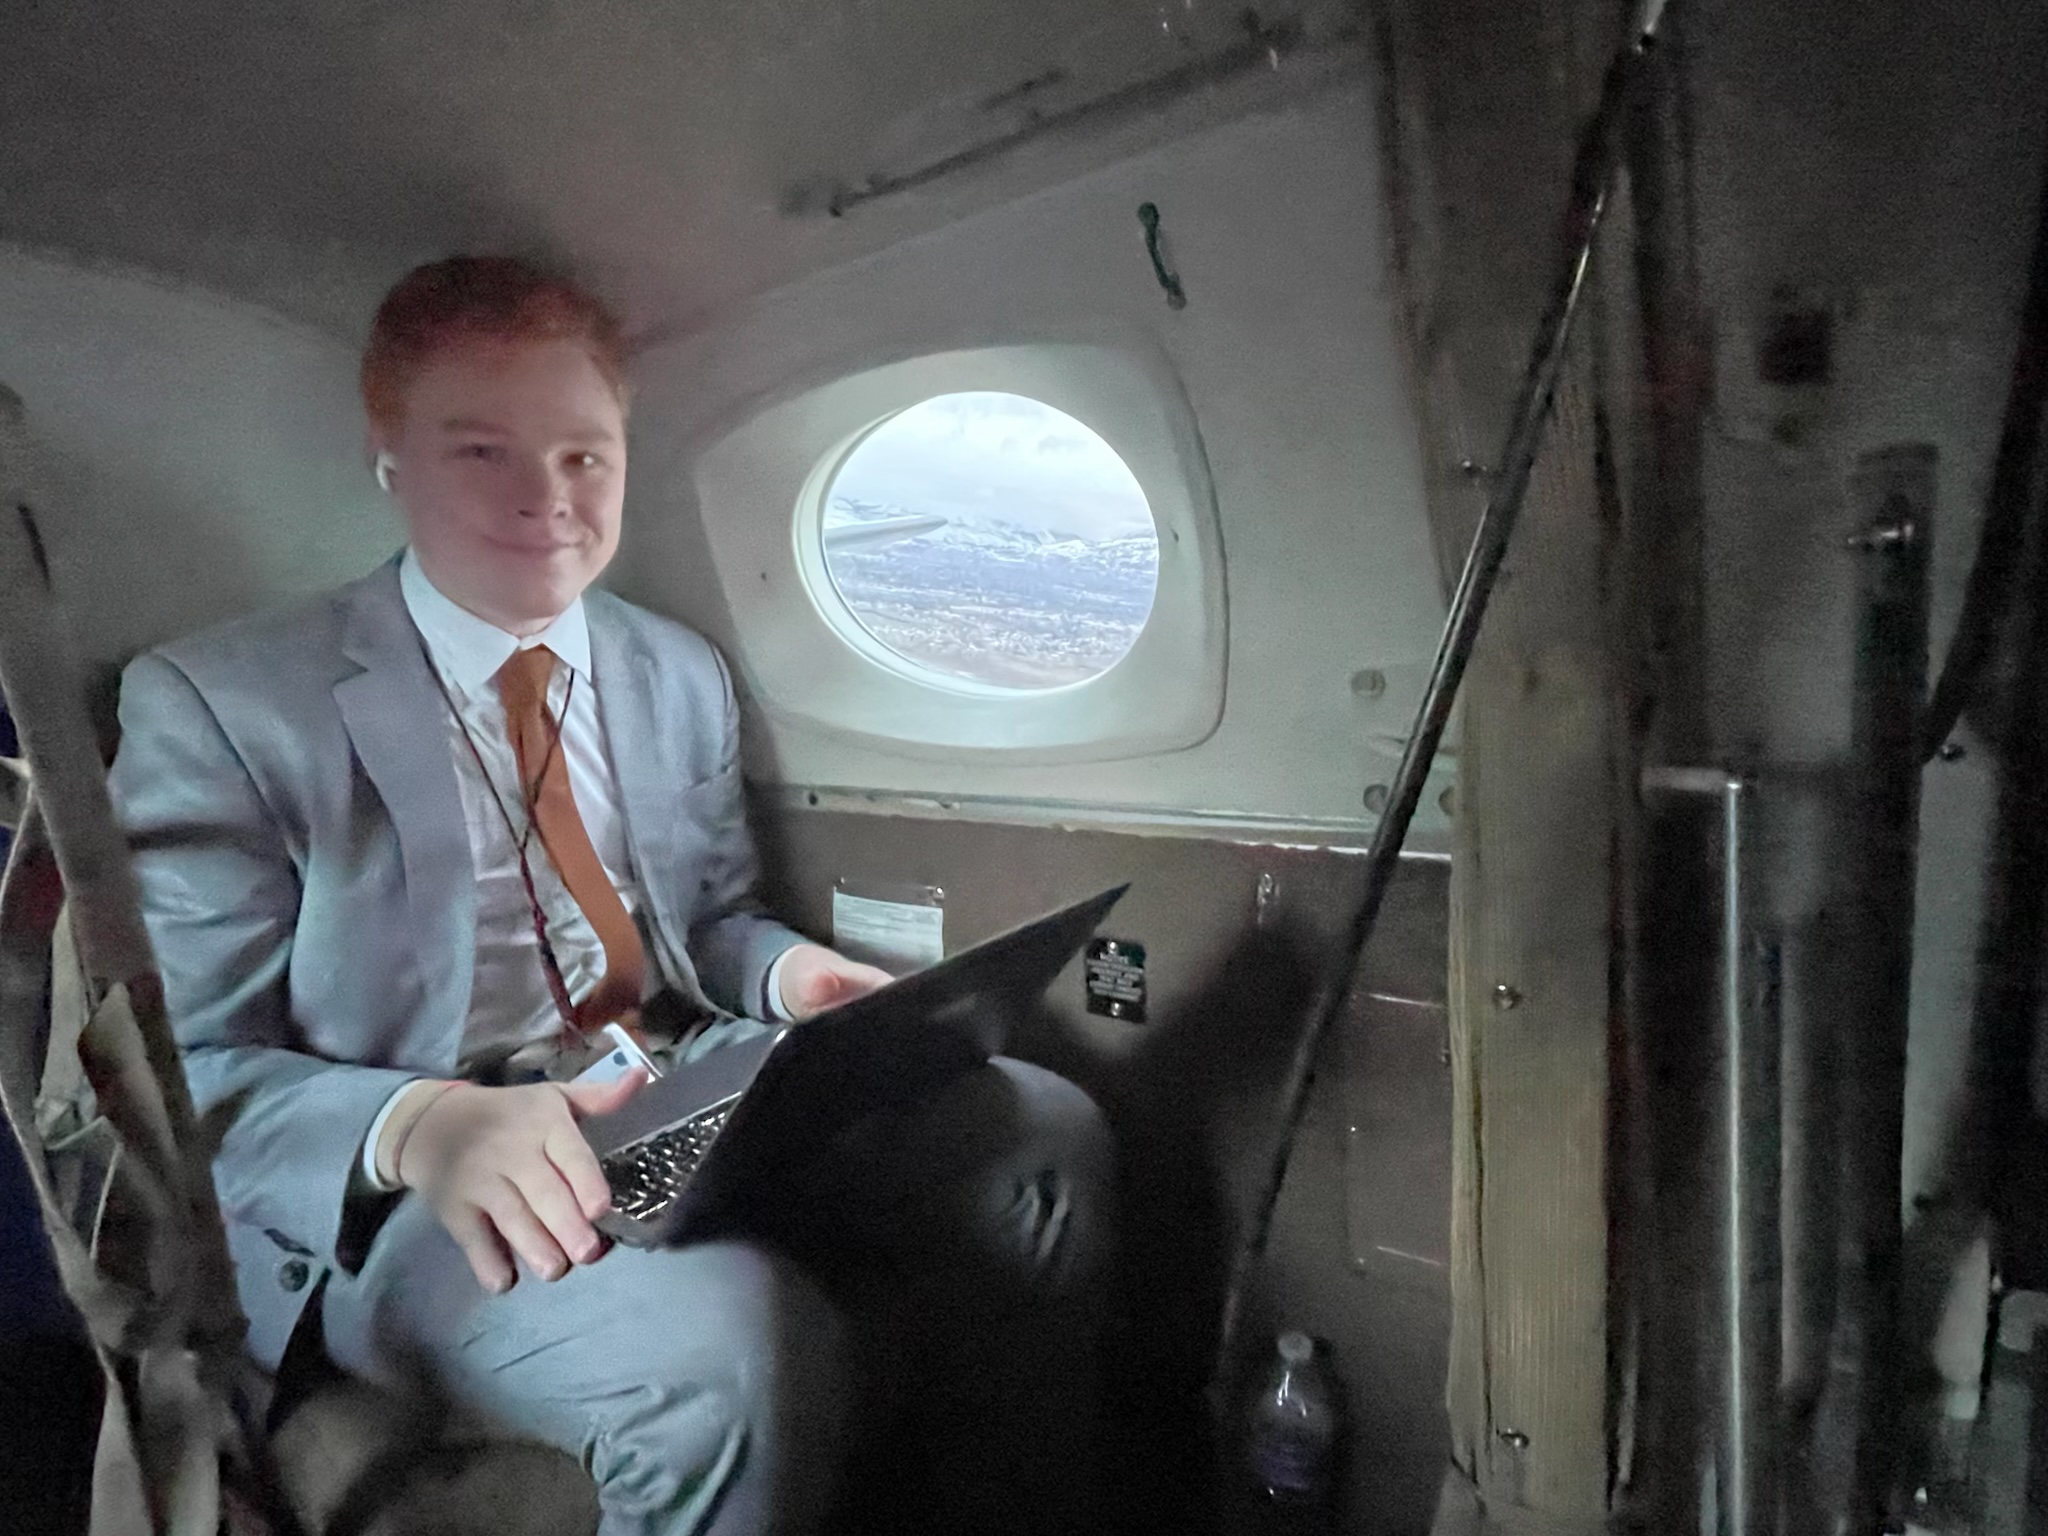 Red haired man working on a computer in an airplane